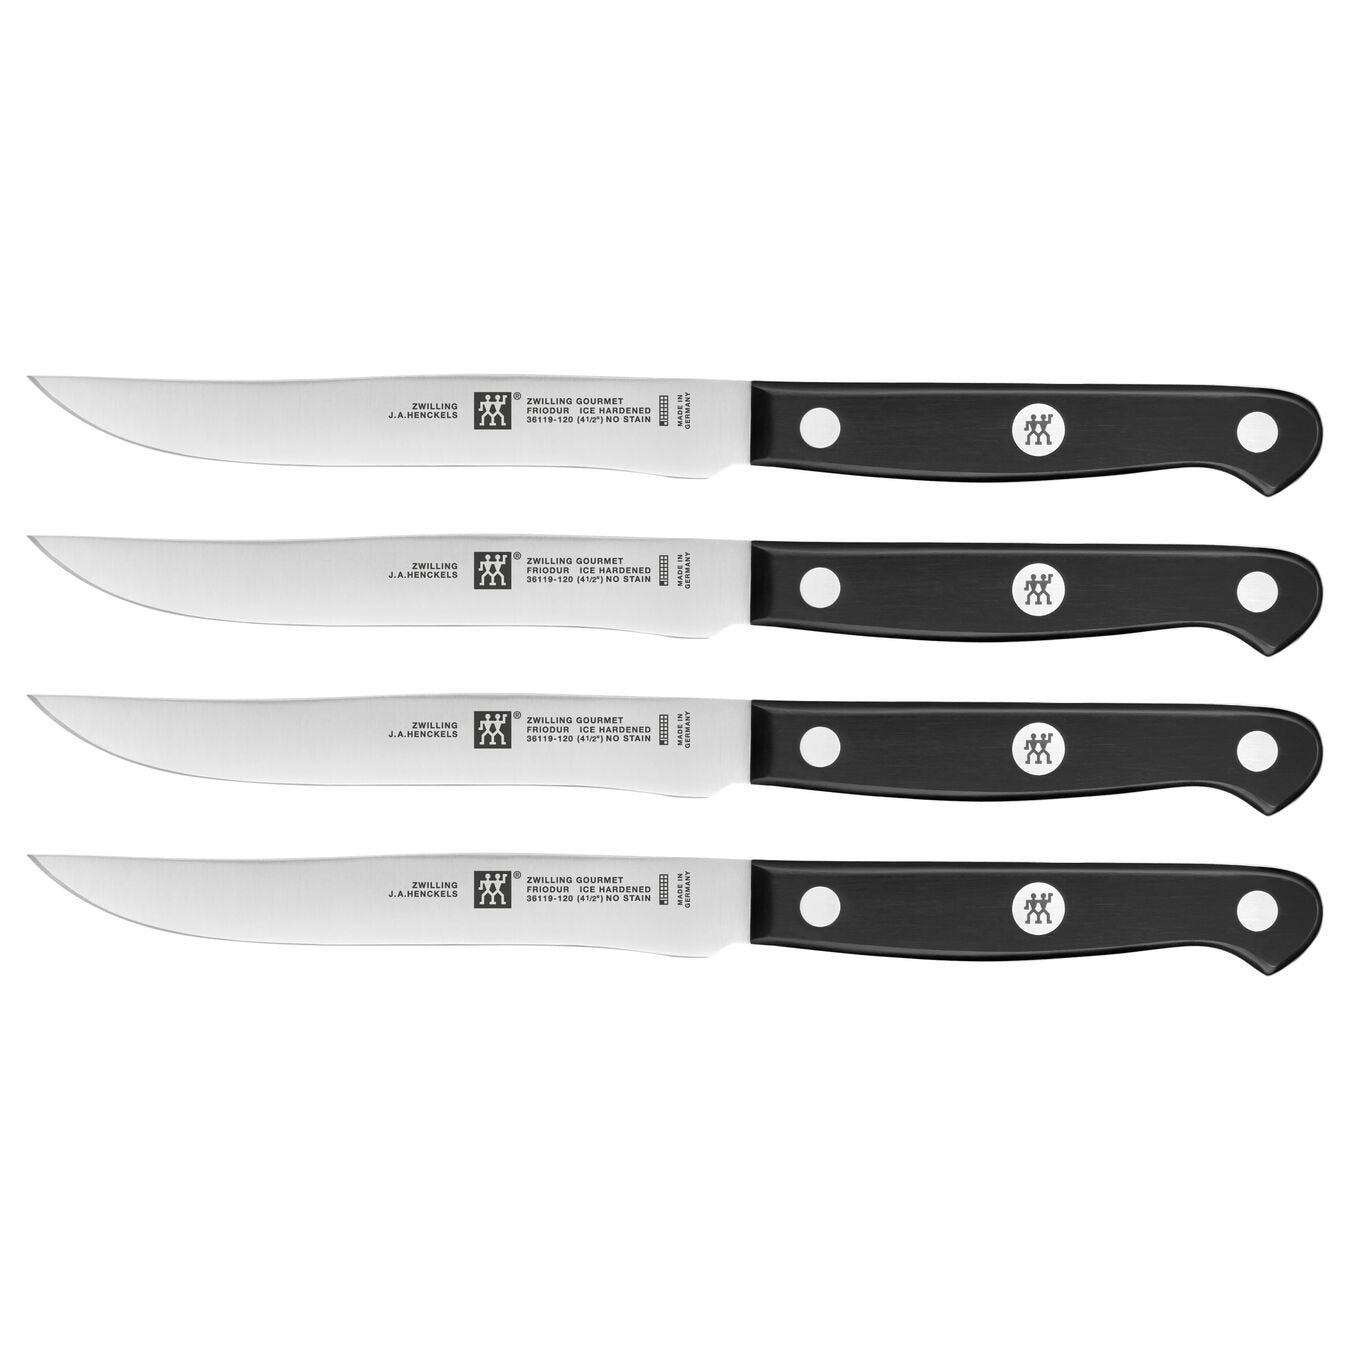 set of four steak knives with riveted black handles on white background